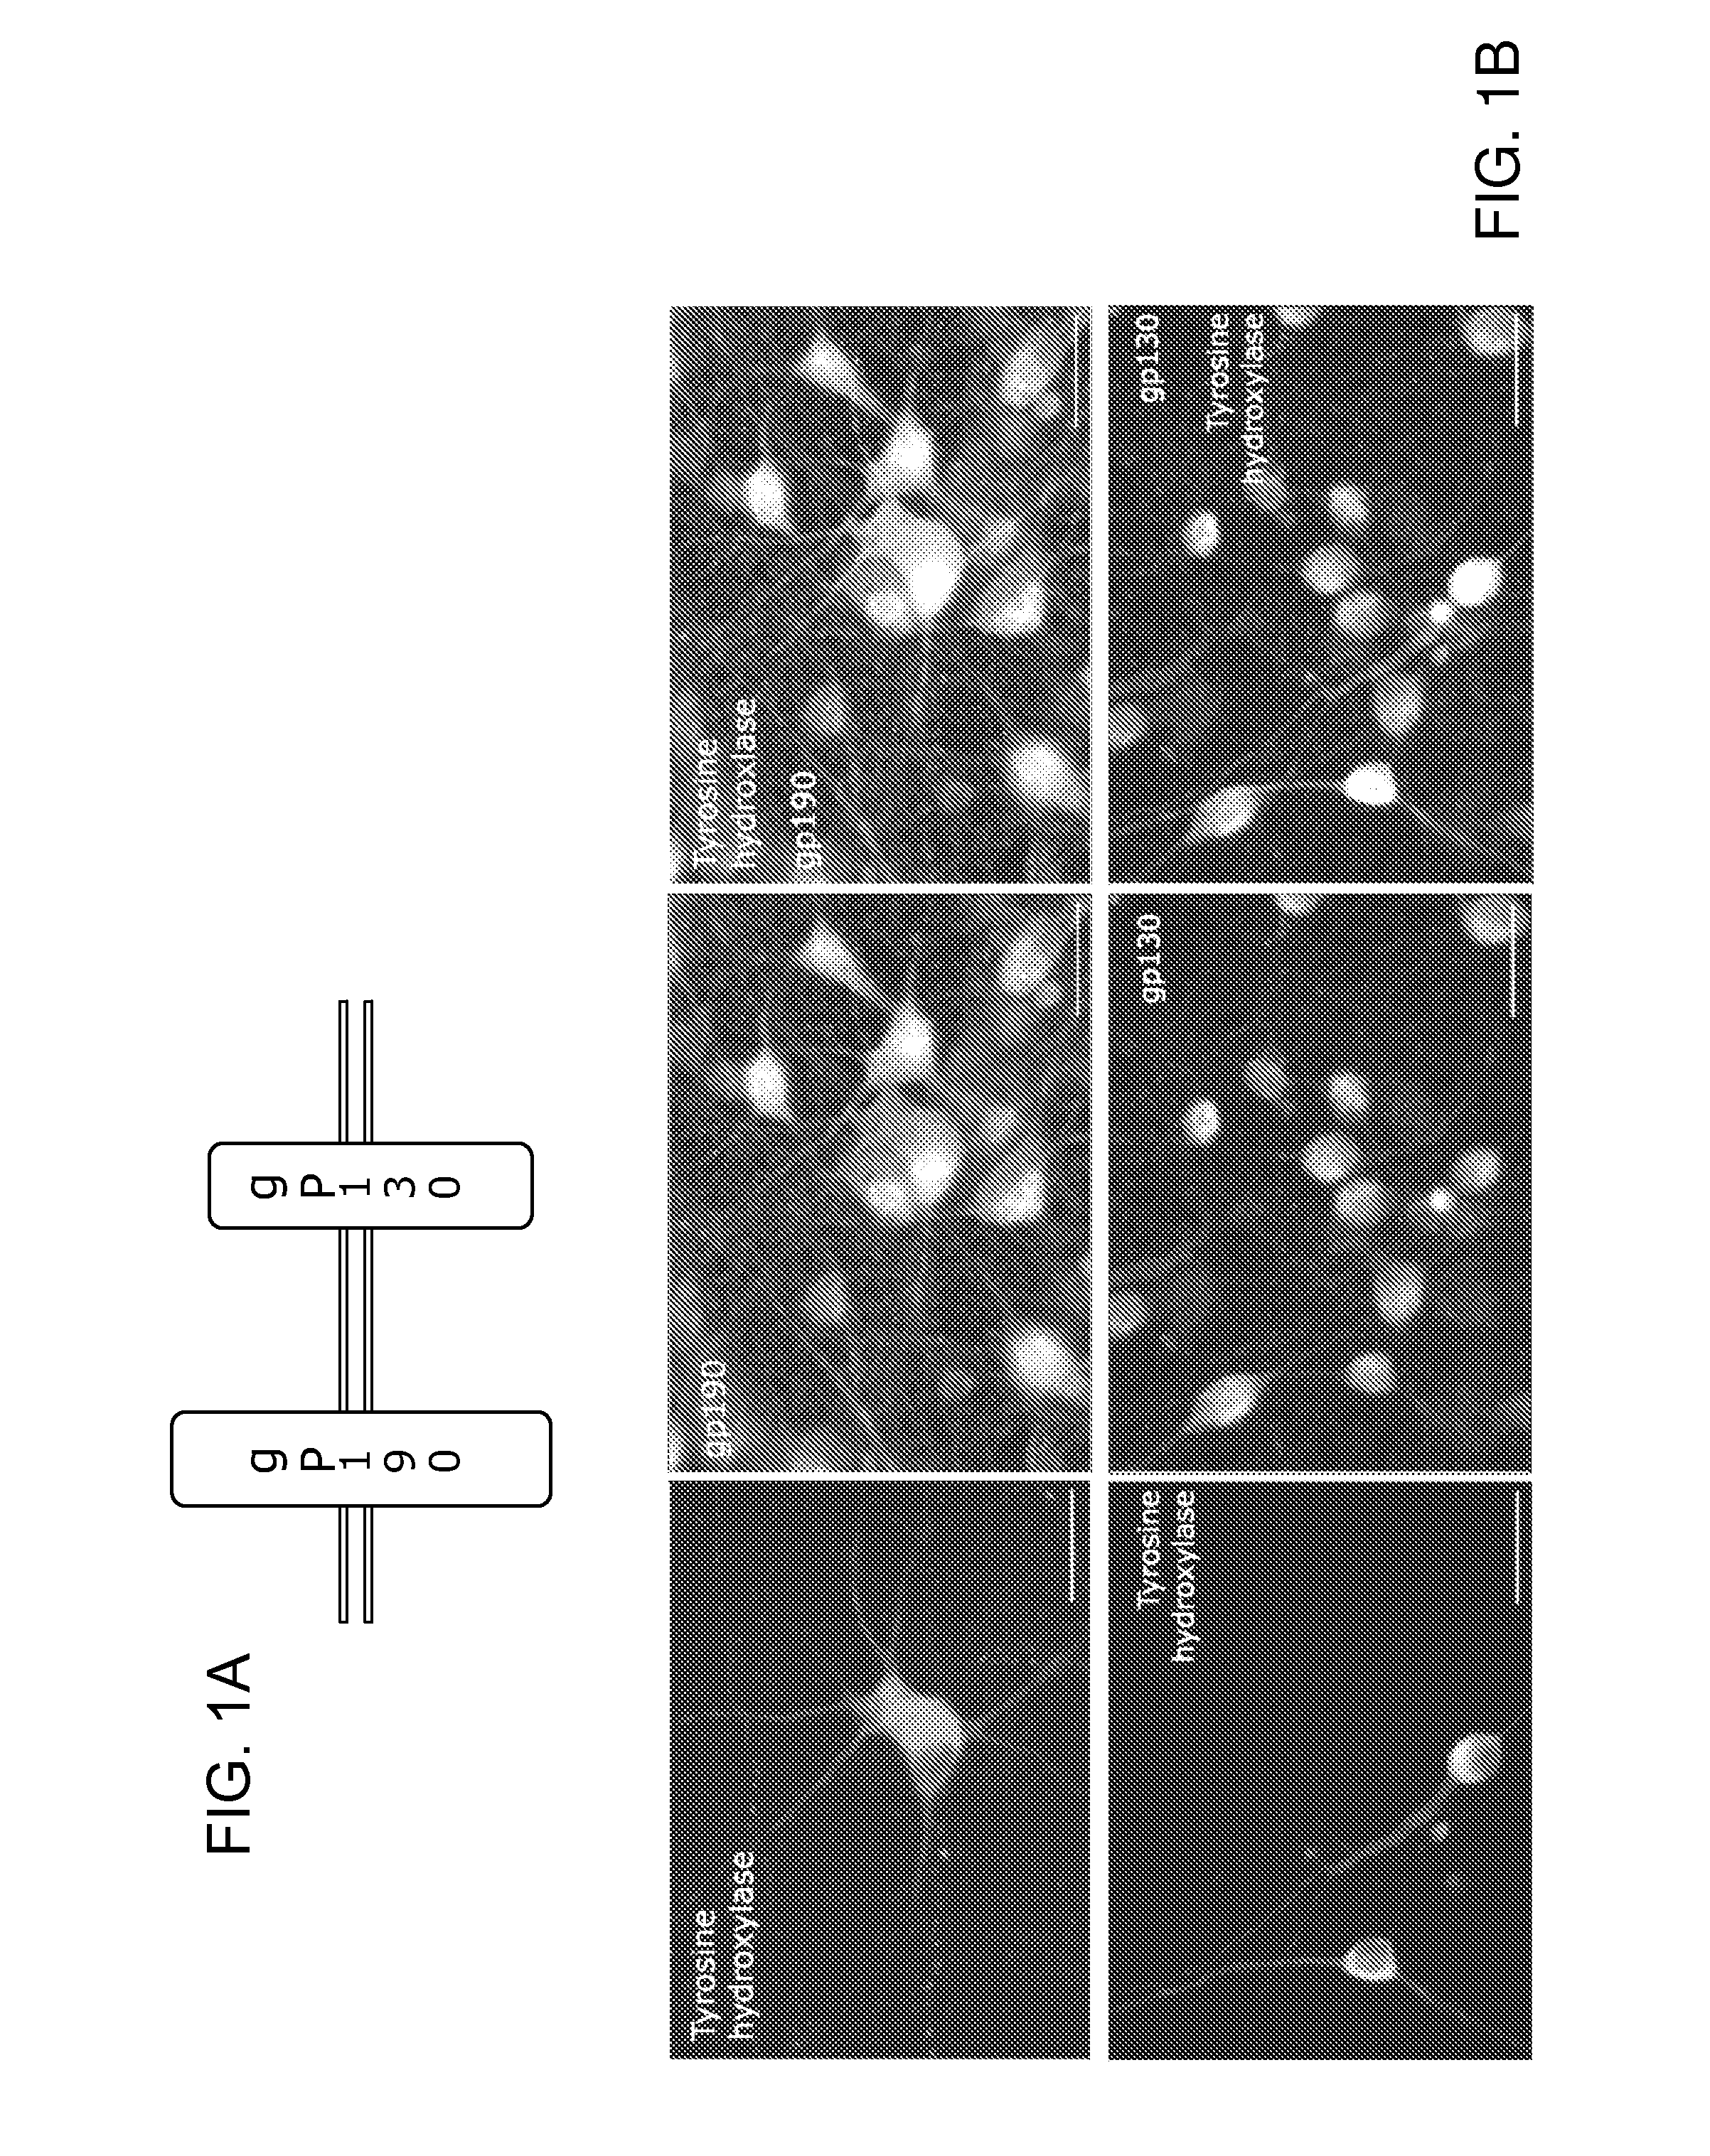 Neurotherapeutic Nanoparticle Compositions and Devices